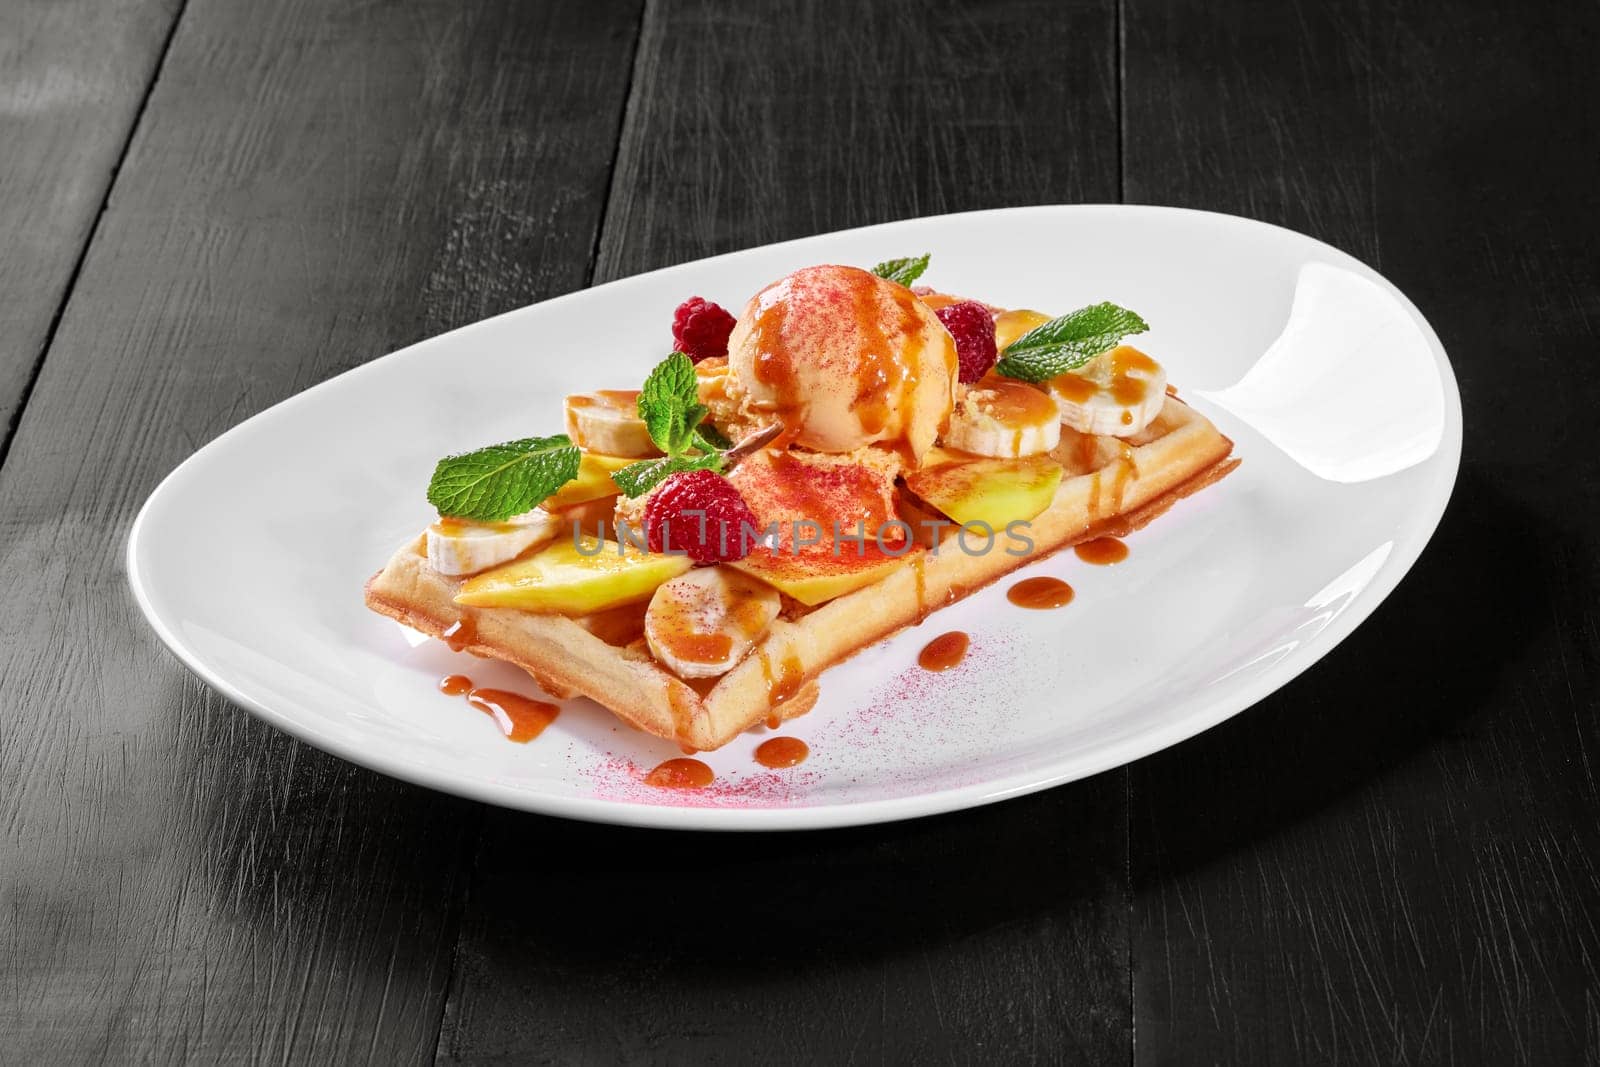 Belgian waffle with fruits, berries and vanilla ice cream, topped with caramel sauce by nazarovsergey